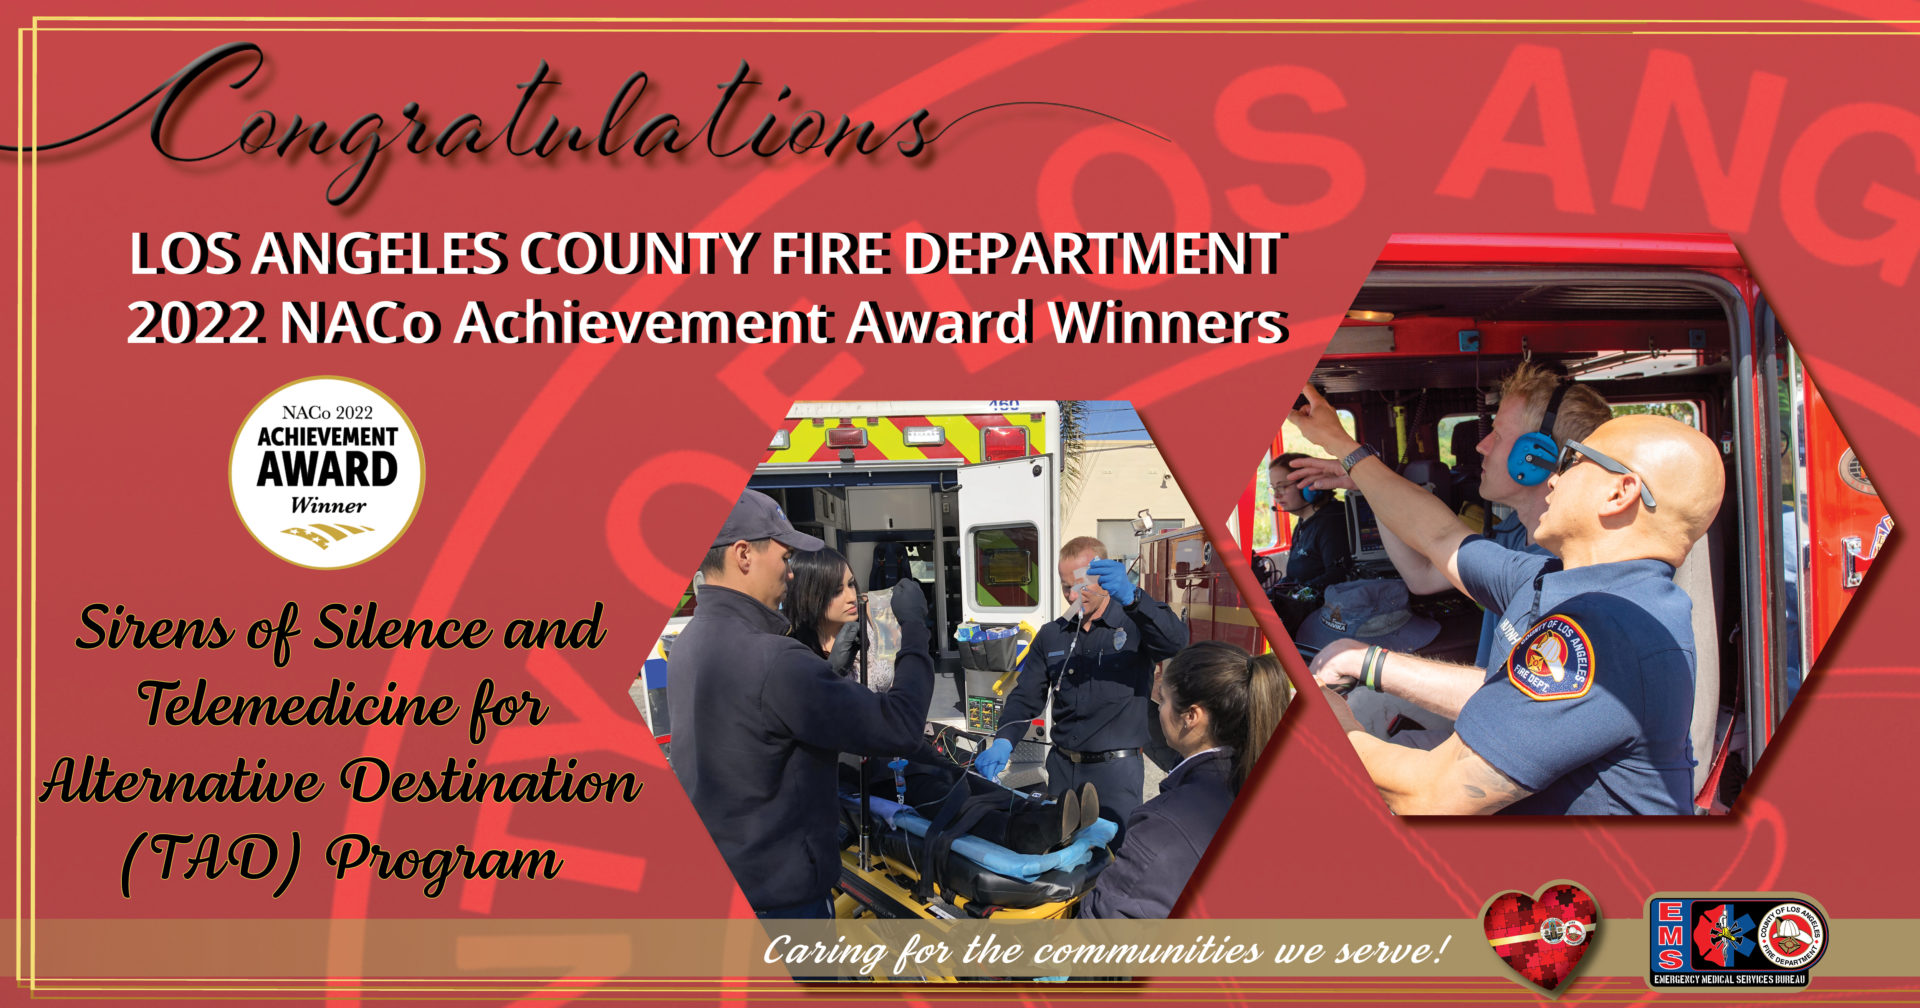 The Los Angeles County Fire Department’s Sirens of Silence and Telemedicine for Alternate Destination (TAD) Programs were among this year’s Los Angeles County National Association of Counties (NACo) 2022 Achievement Award winners.